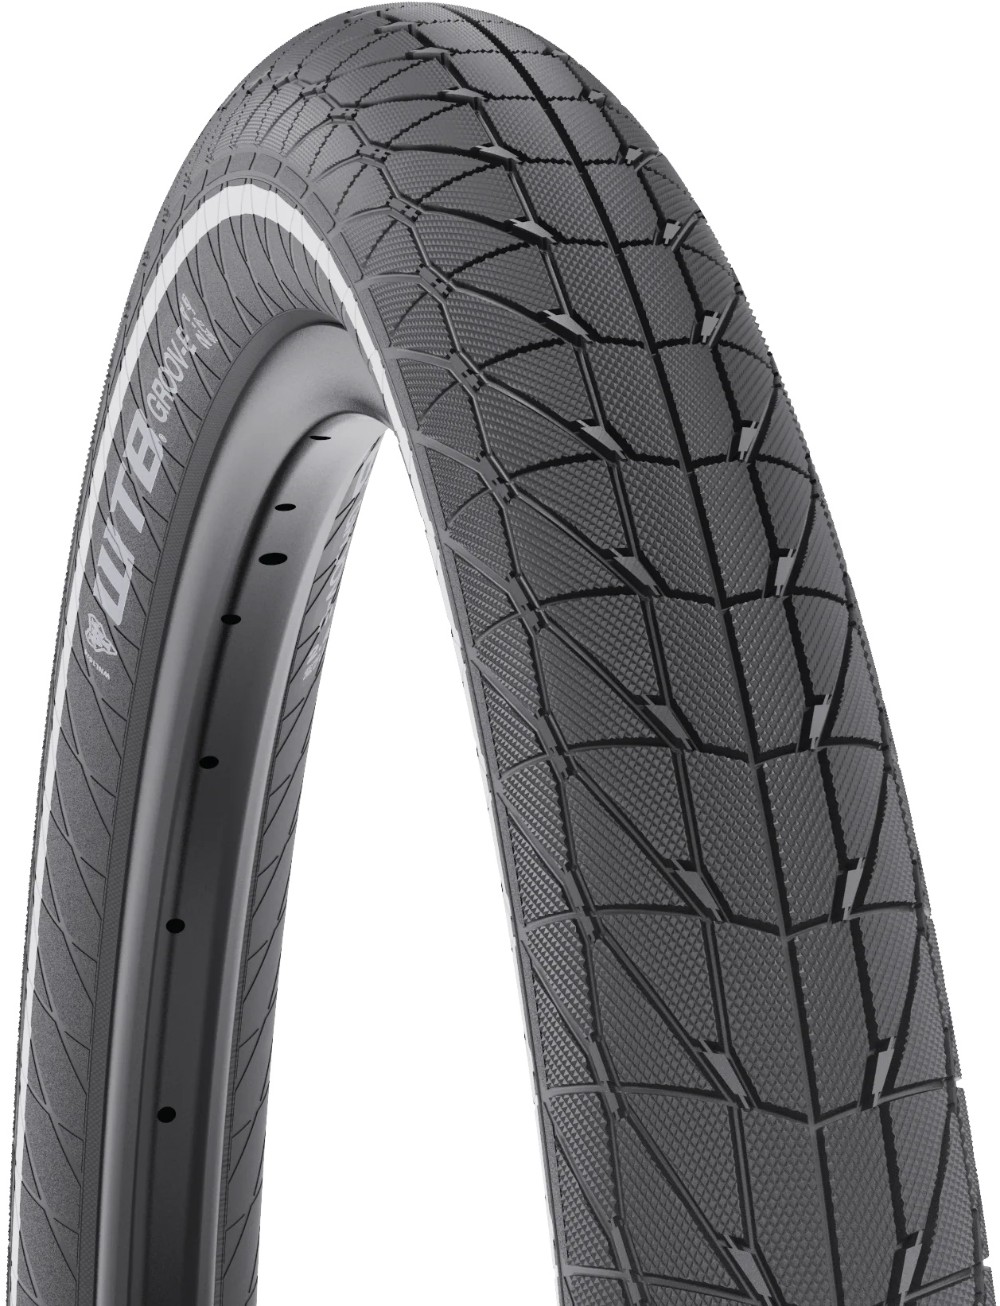 Groov-E Comp 60tpi DNA 27.5" Tyre with Reflective Strip image 0